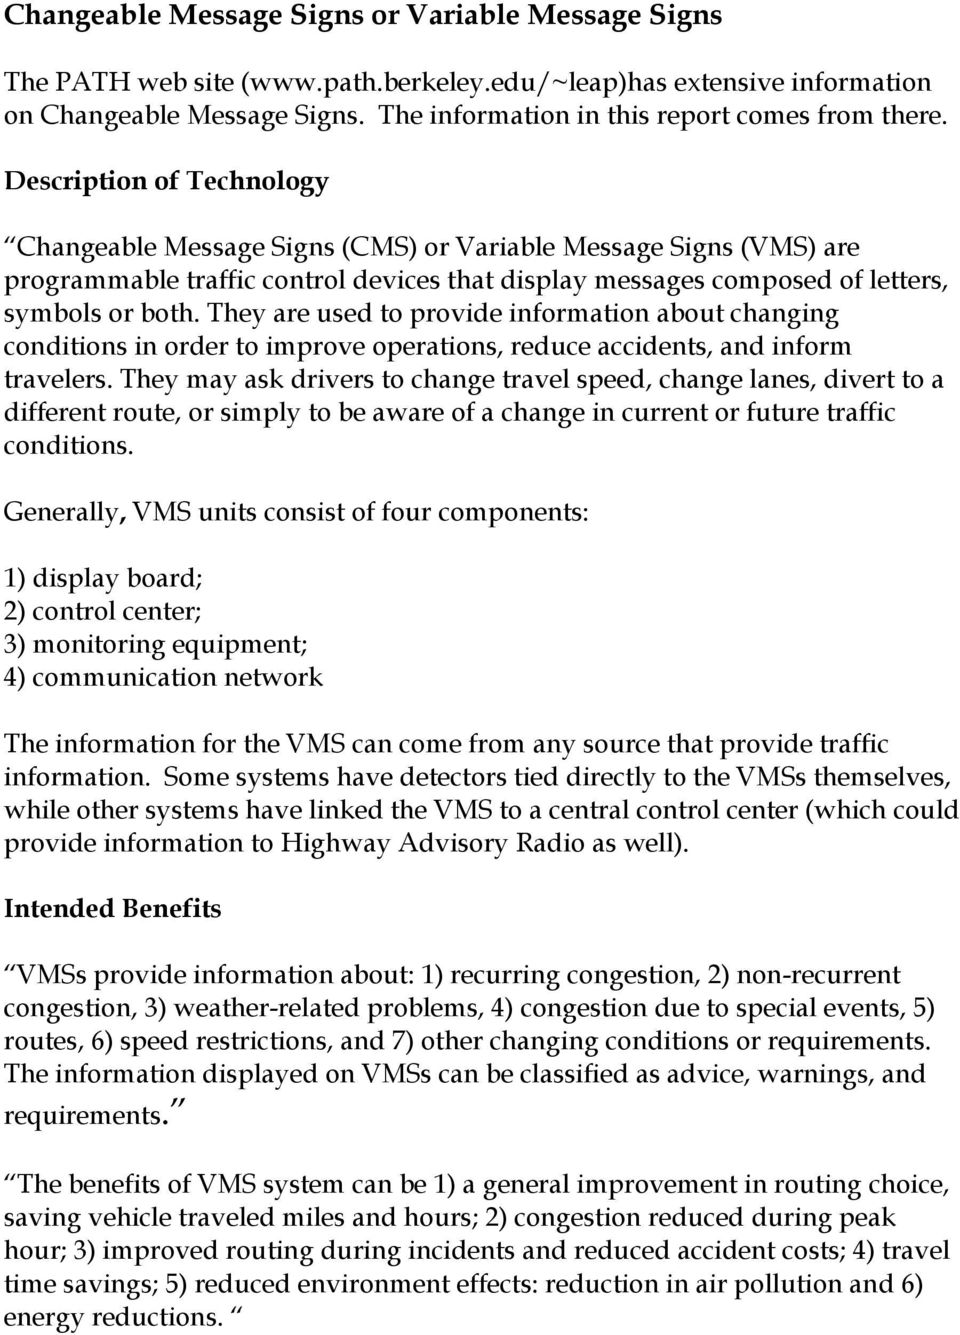 Description of Technology Changeable Message Signs (CMS) or Variable Message Signs (VMS) are programmable traffic control devices that display messages composed of letters, symbols or both.